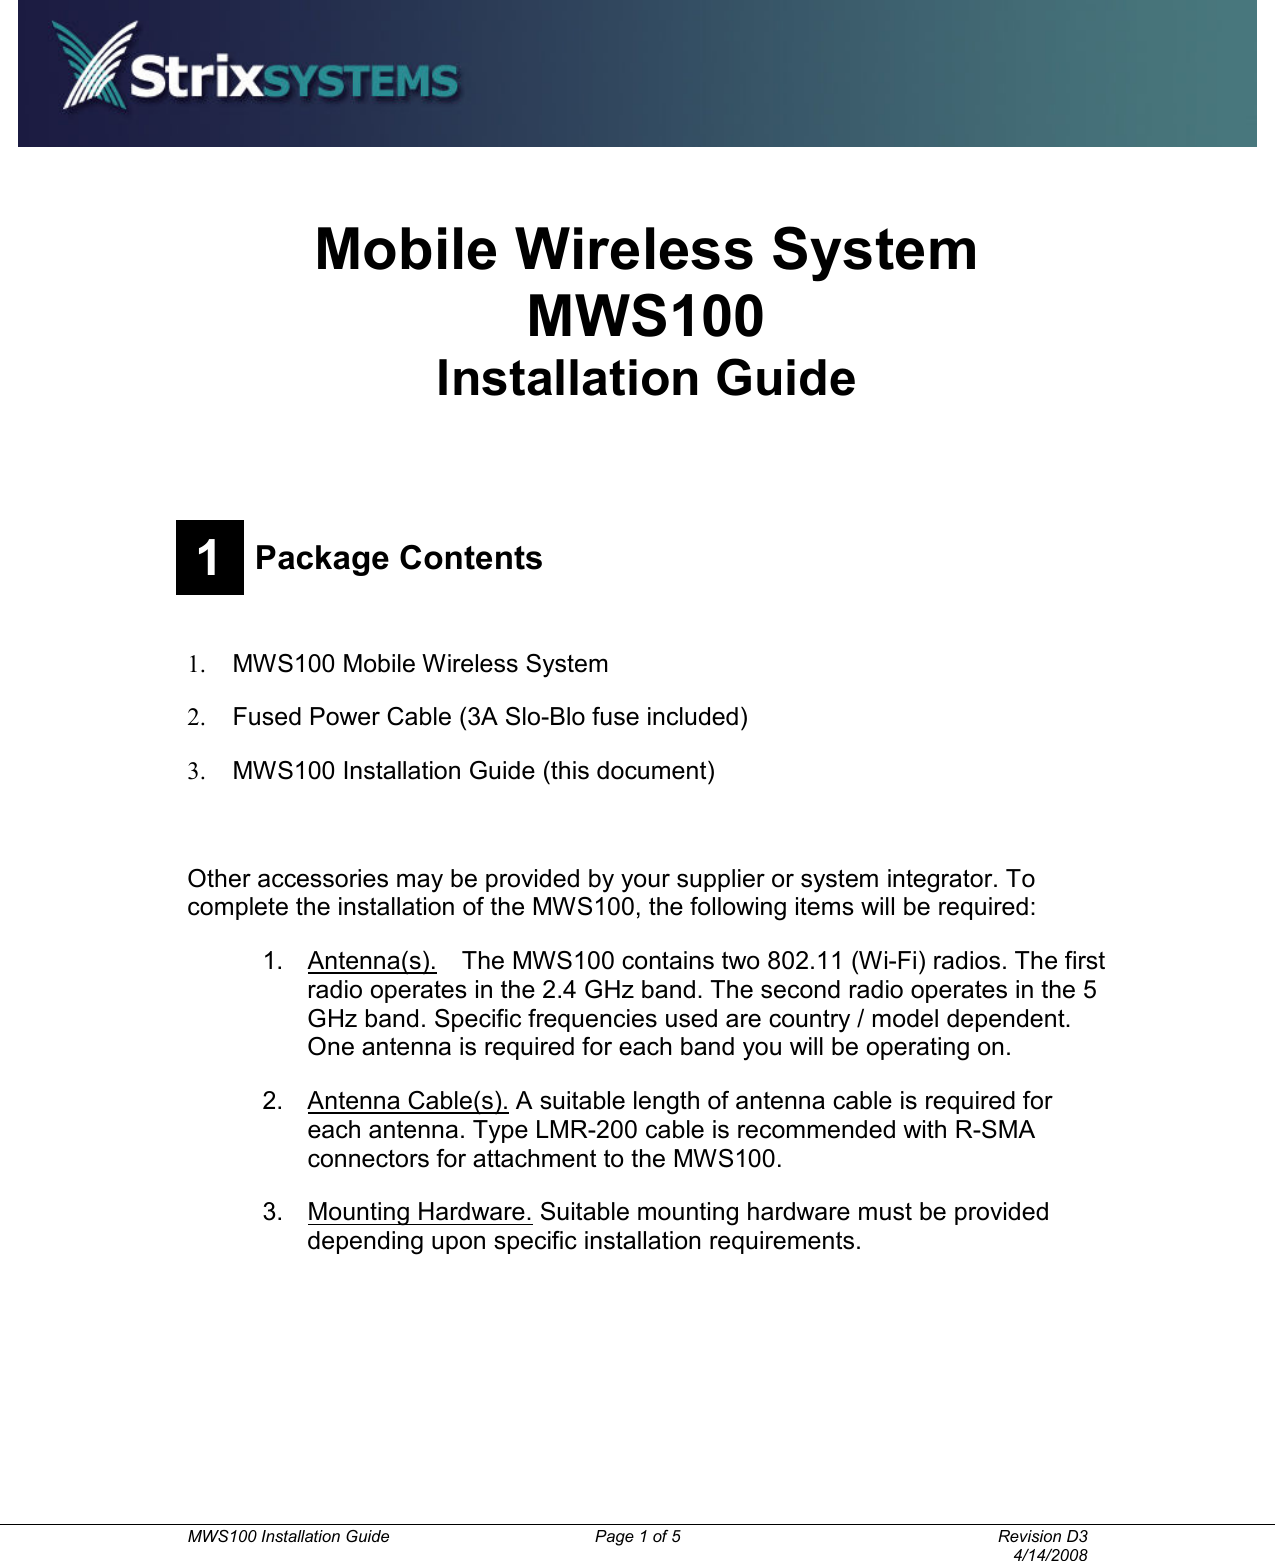          MWS100 Installation Guide  Page 1 of 5  Revision D3       4/14/2008 Mobile Wireless System MWS100 Installation Guide  1 Package Contents  1.  MWS100 Mobile Wireless System 2.  Fused Power Cable (3A Slo-Blo fuse included) 3.  MWS100 Installation Guide (this document)    Other accessories may be provided by your supplier or system integrator. To complete the installation of the MWS100, the following items will be required: 1.  Antenna(s).    The MWS100 contains two 802.11 (Wi-Fi) radios. The first radio operates in the 2.4 GHz band. The second radio operates in the 5 GHz band. Specific frequencies used are country / model dependent. One antenna is required for each band you will be operating on. 2.  Antenna Cable(s). A suitable length of antenna cable is required for each antenna. Type LMR-200 cable is recommended with R-SMA connectors for attachment to the MWS100. 3.  Mounting Hardware. Suitable mounting hardware must be provided depending upon specific installation requirements. 